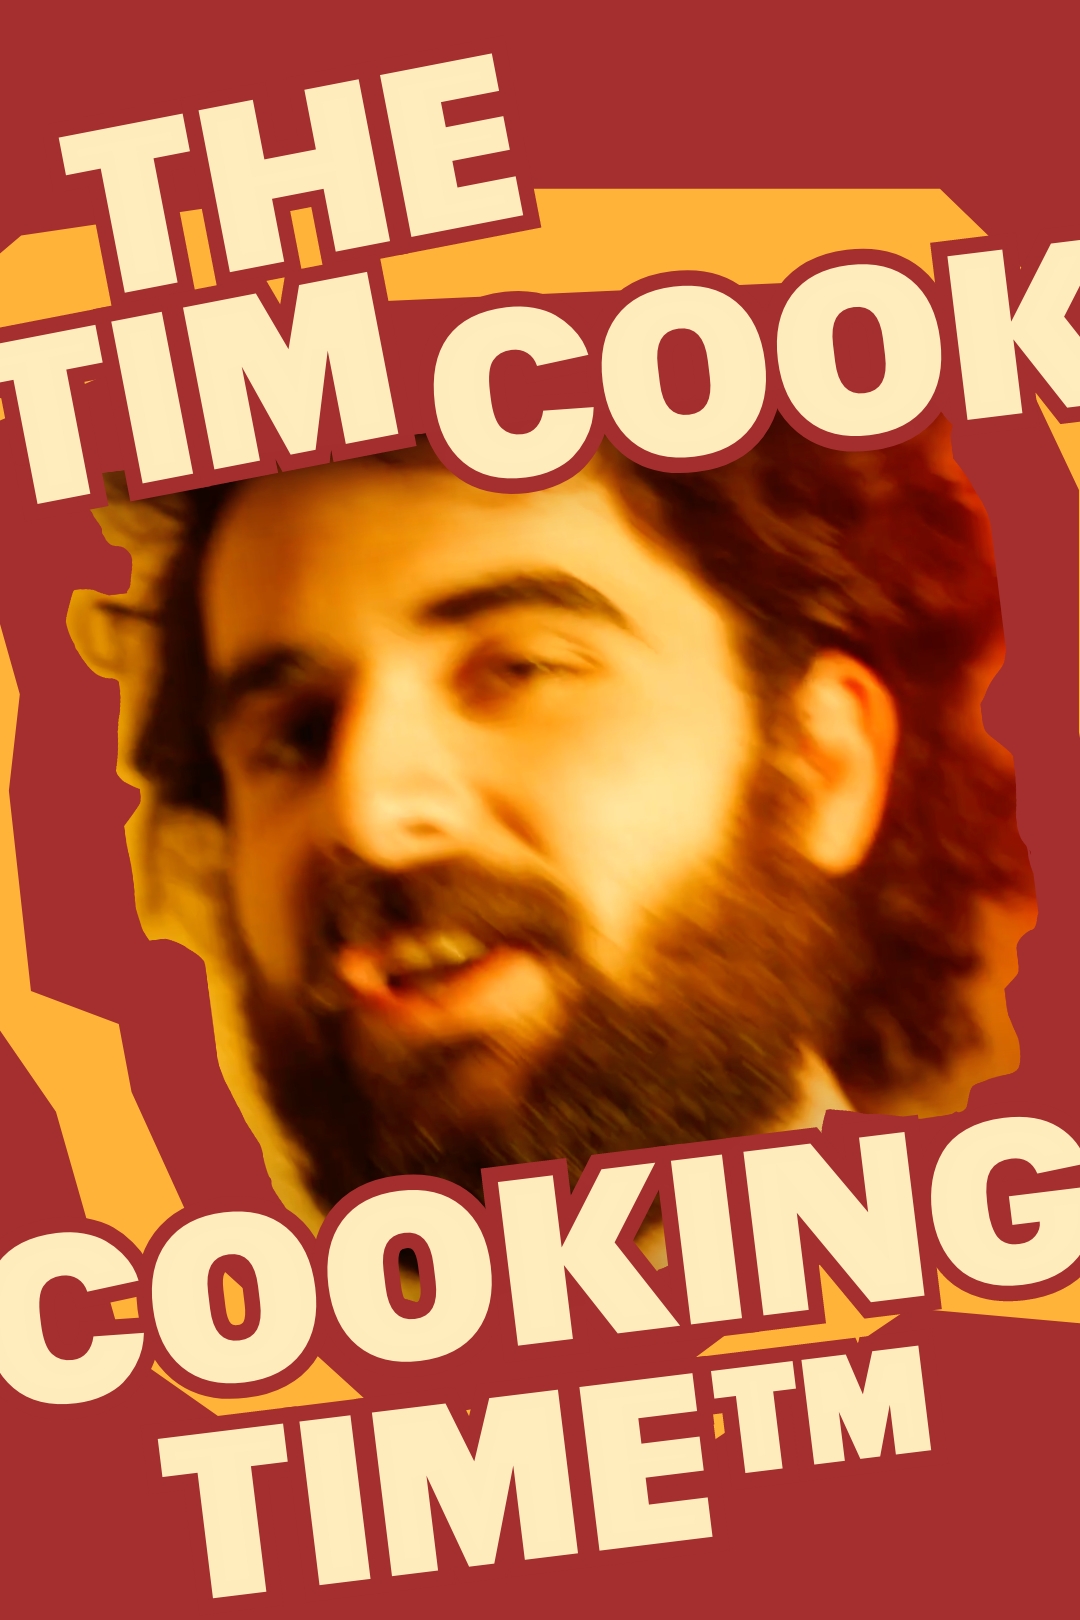 Poster for the film "The Tim Cook Cooking Time™"